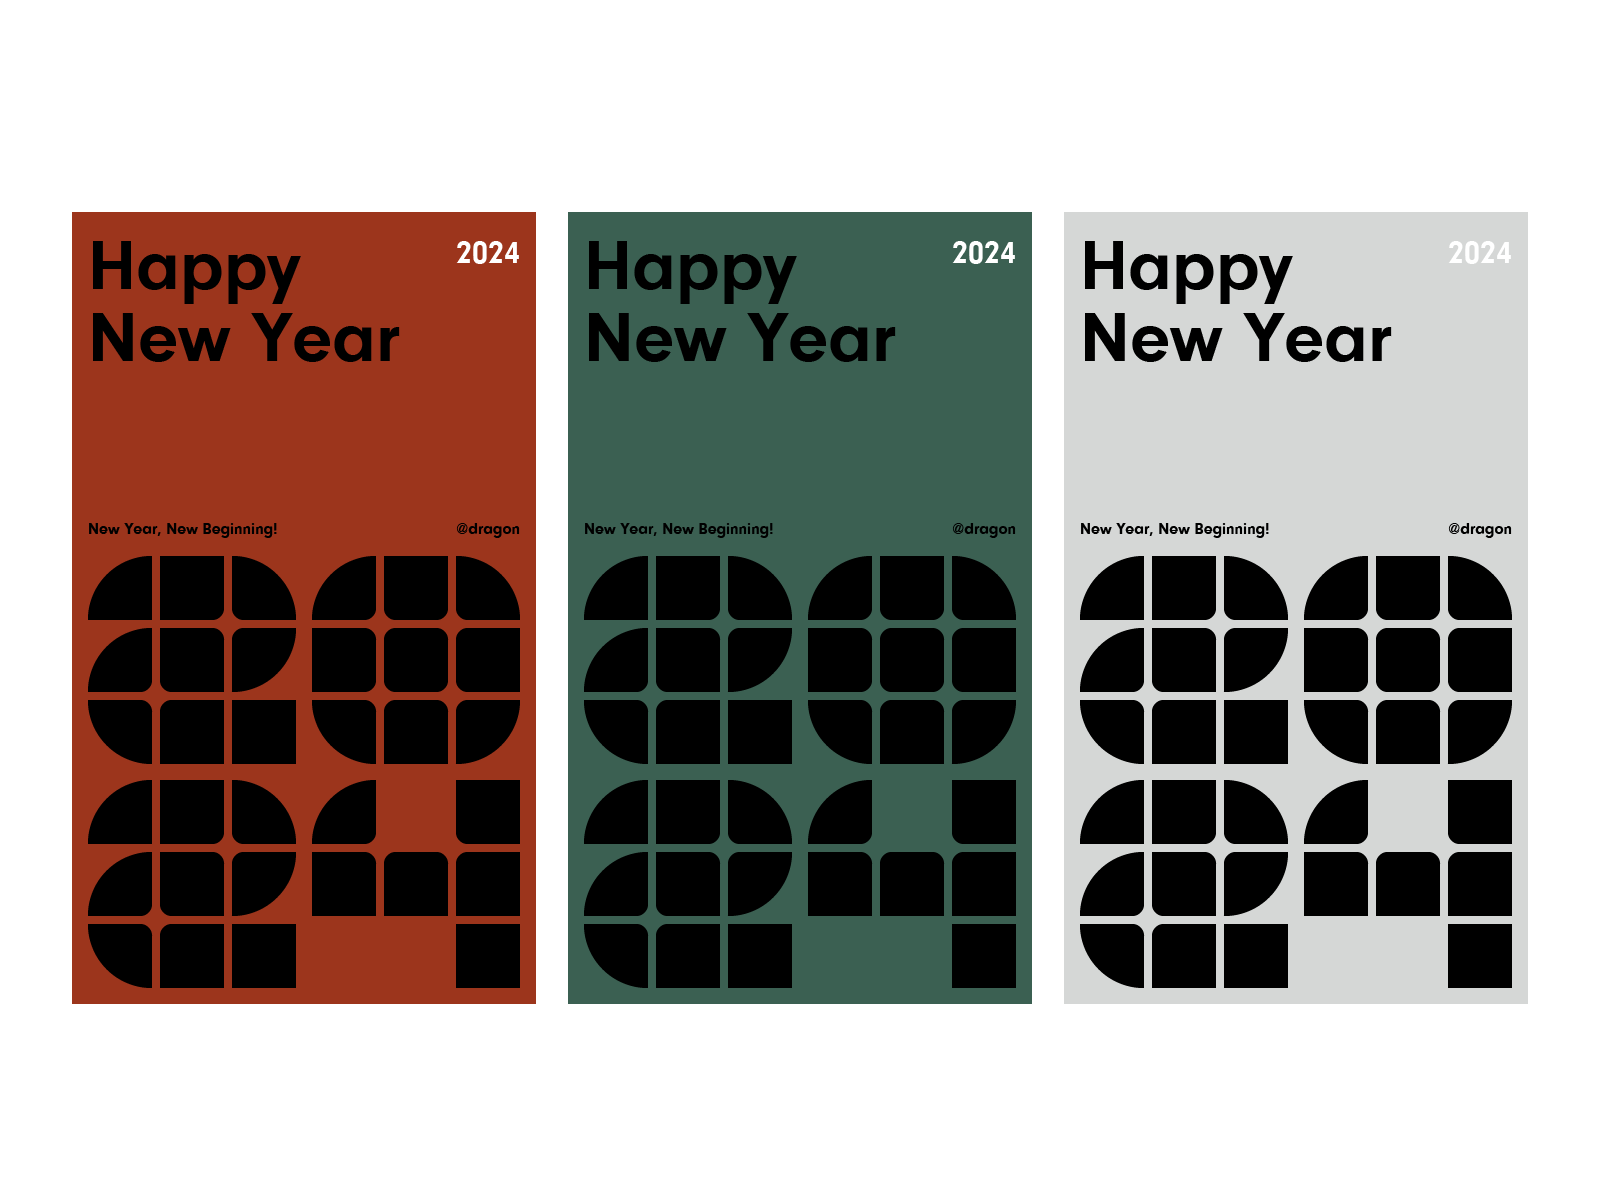 2024 Happy New Year 2024 branding color design digit fashion geometry graphic design illustration logo new year poster simplicity